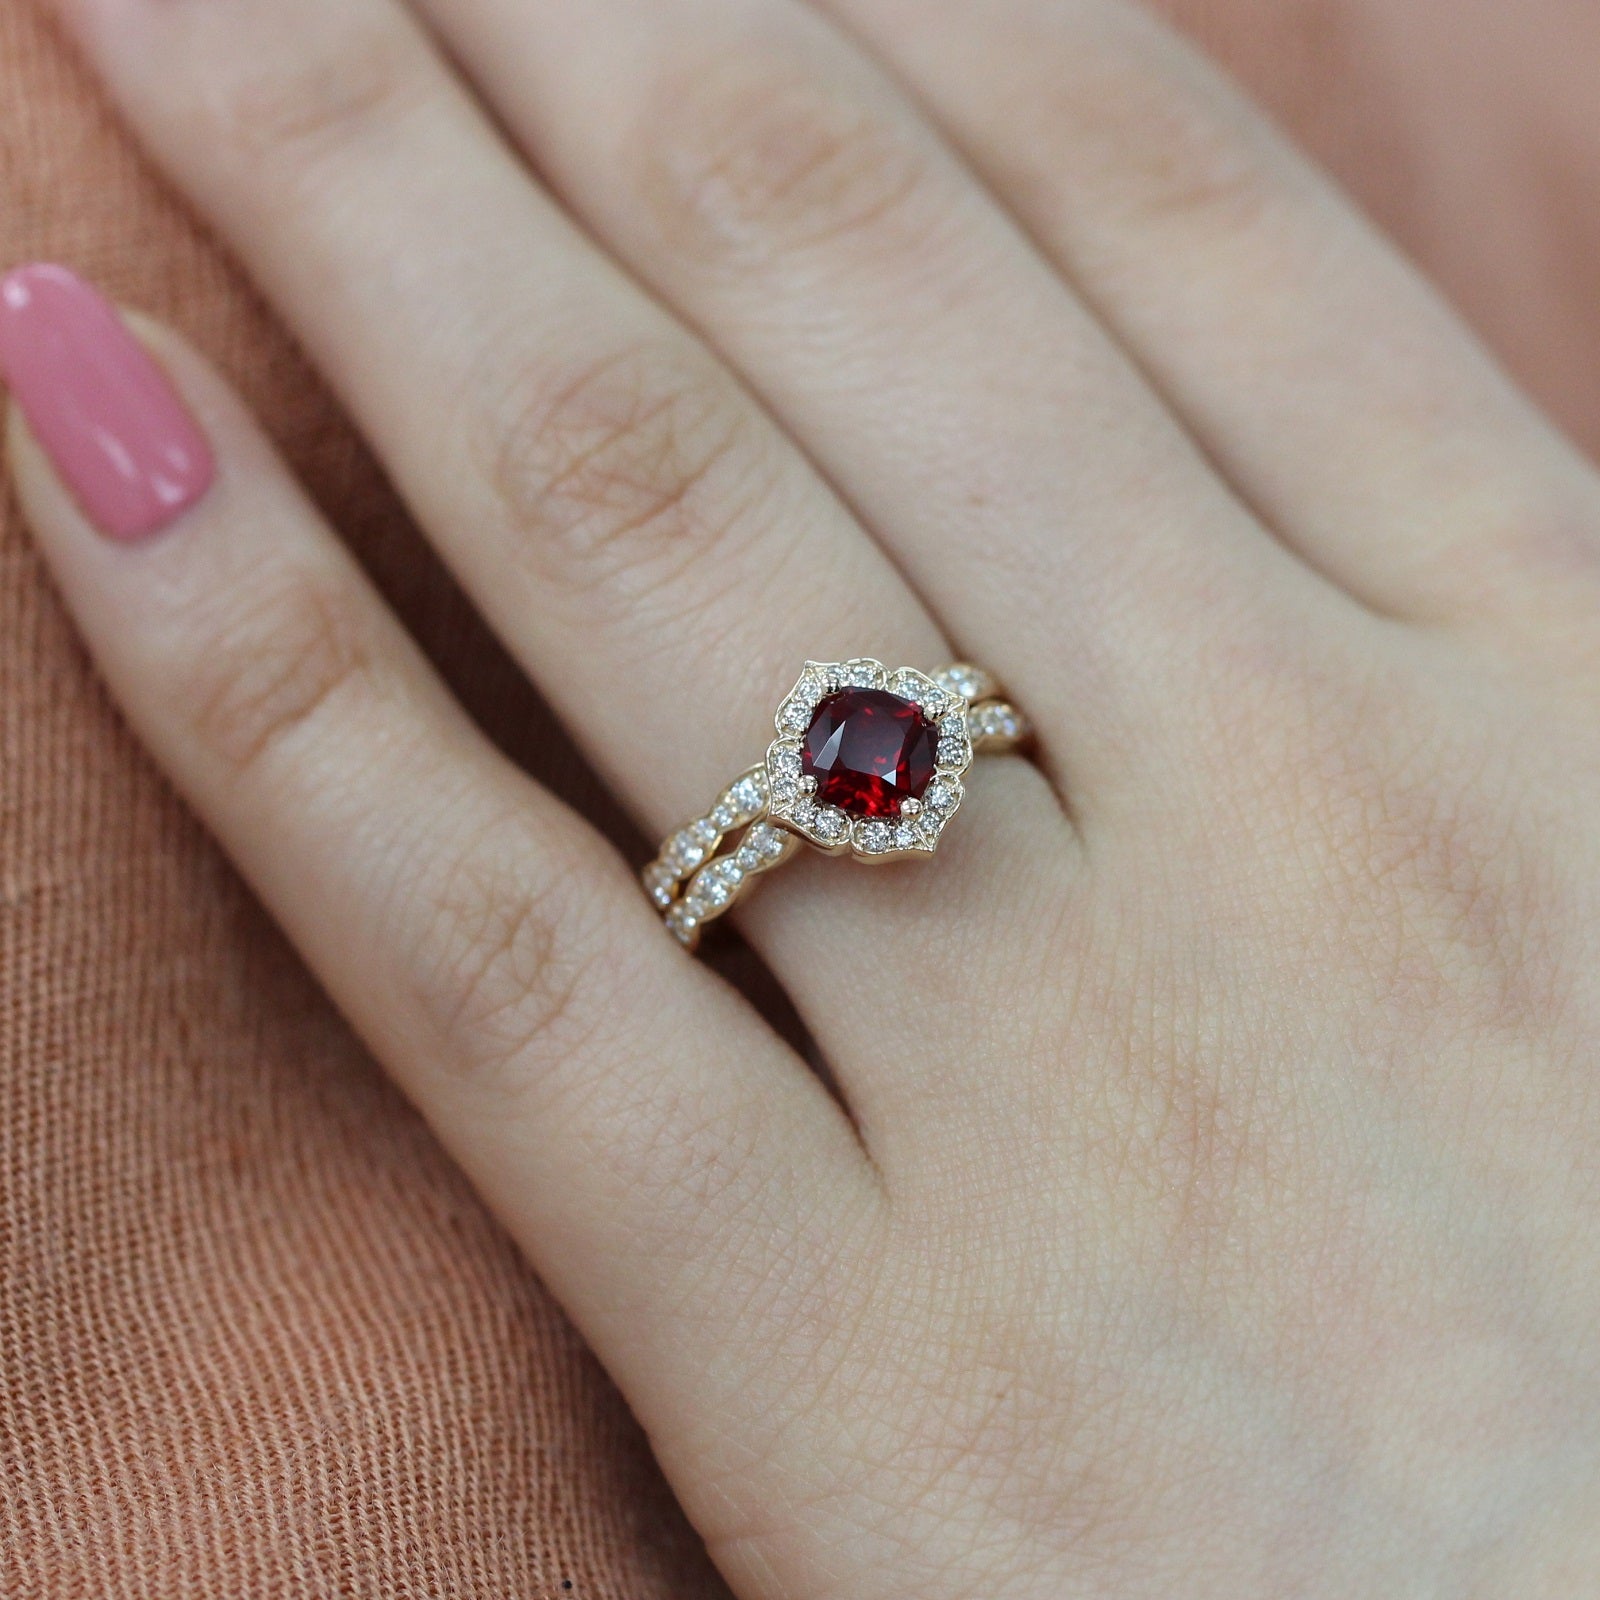 Round Diamond Antique Star Engagement Ring With Ruby In 18K Yellow Gold